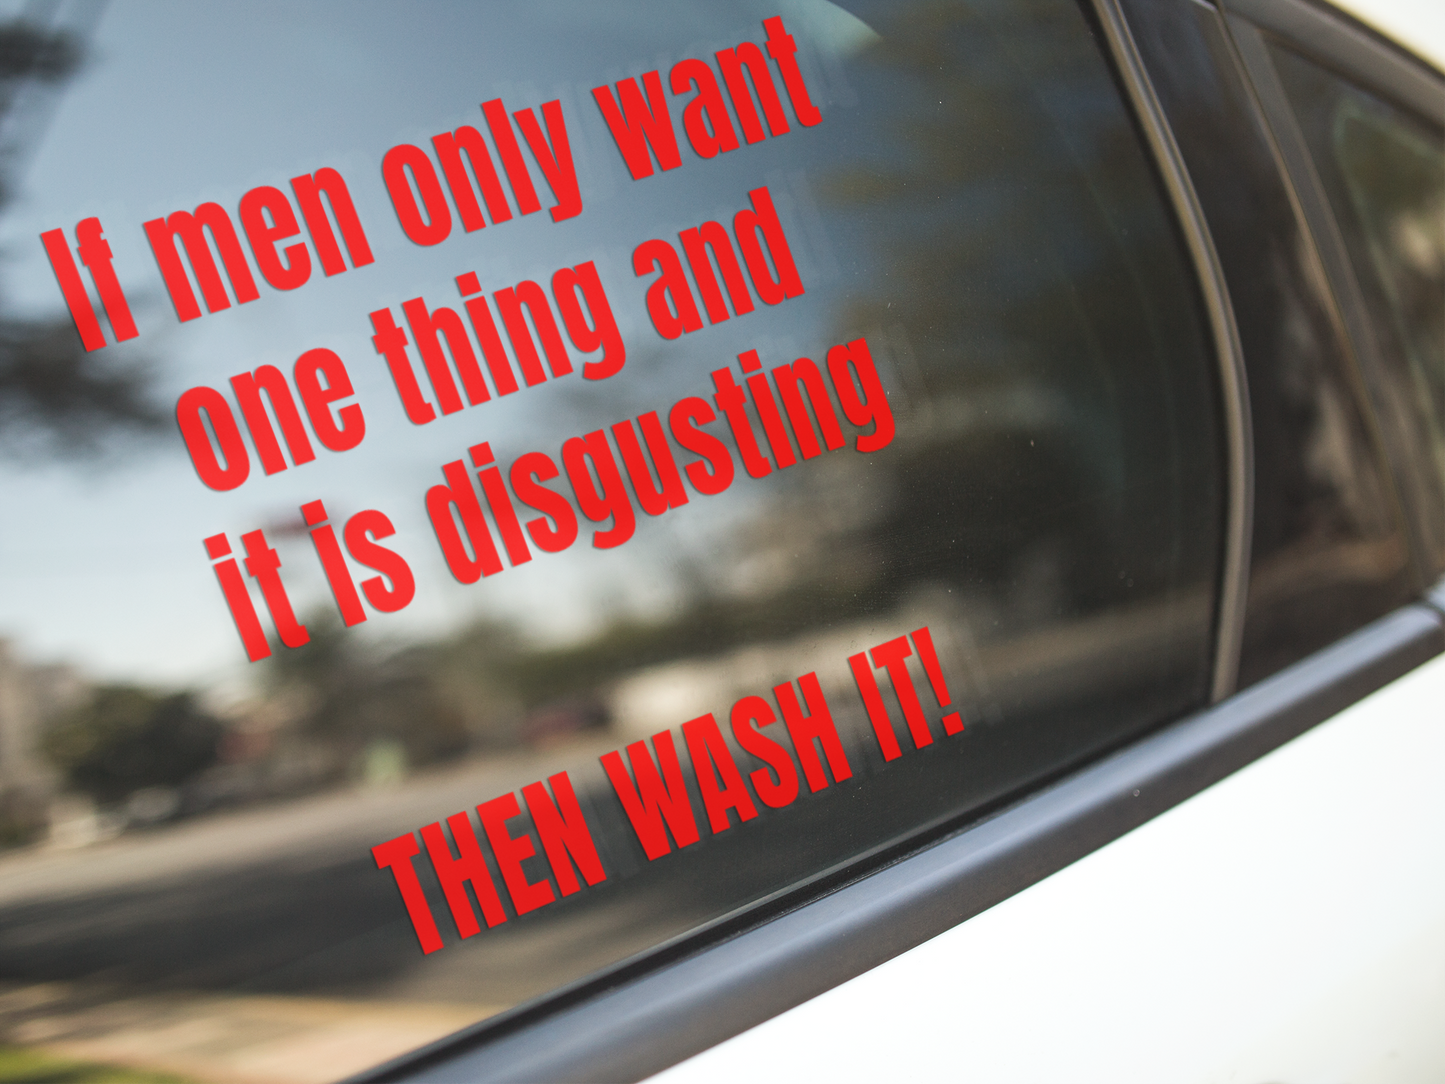 If men only want one thing and it's disgusting, then WASH IT - Vinyl decal bumper sticker car sticker computer sticker Die cut stickers funny sticker funny stickers LOL sticker sarcastic sticker sticker Sticker design Sticker Shop stickers vinyl sticker Vinyl stickers water proof sticker window sticker